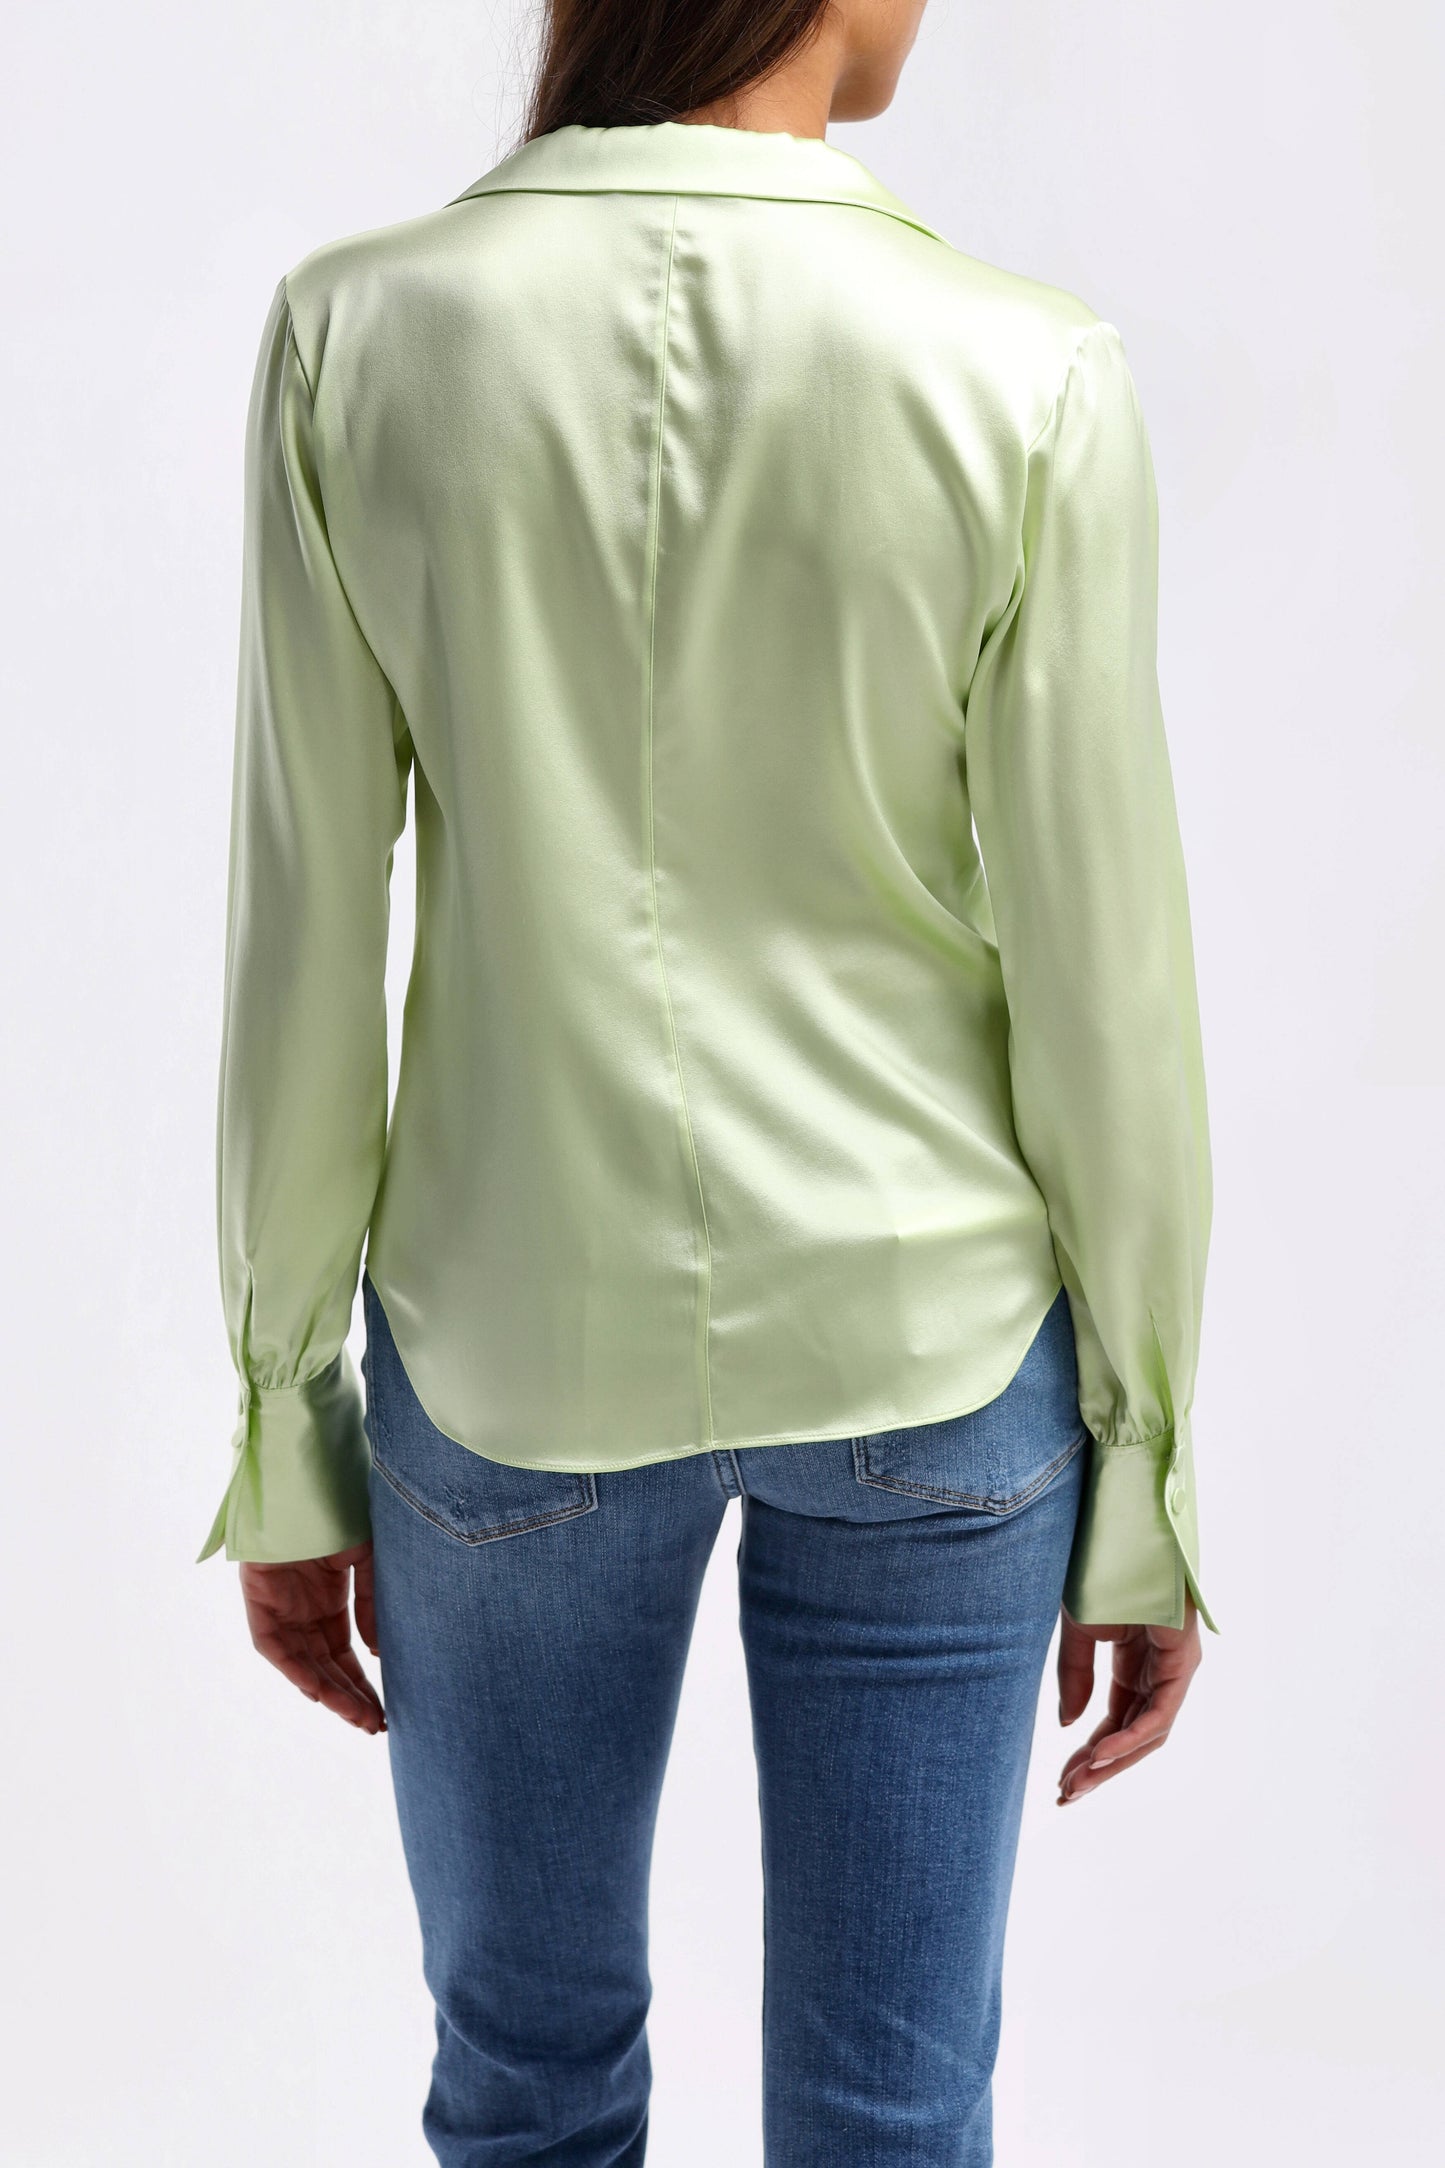 Bluse The Femme in Bright LimeFrame - Anita Hass